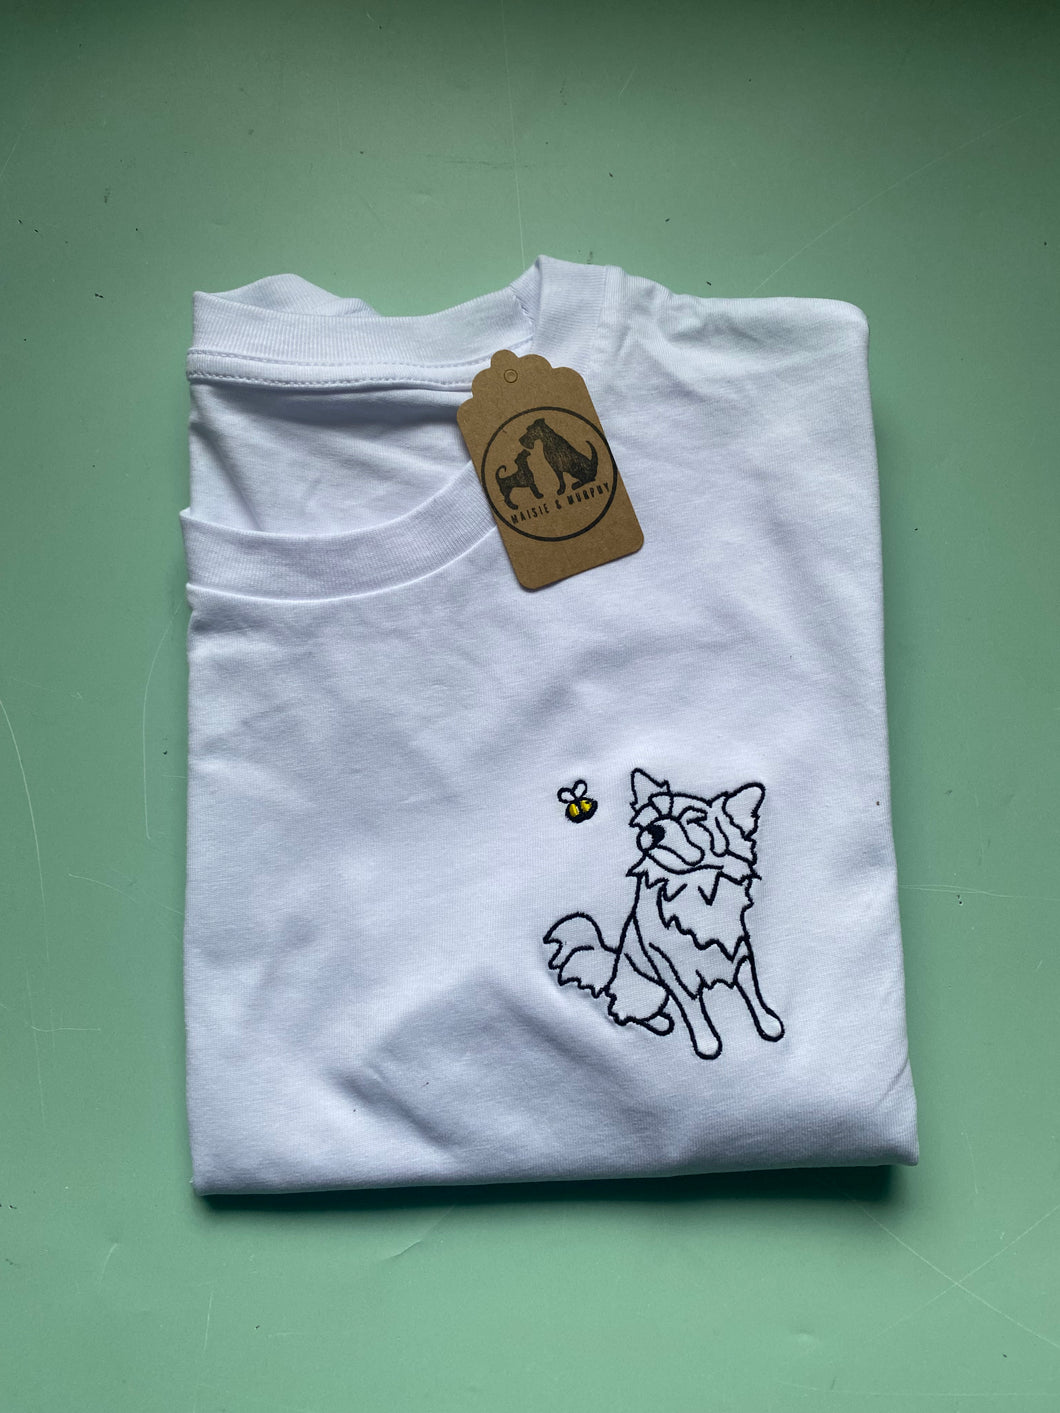 Long Hair Chihuahua Outline T-shirt - embroidered chihuahua dog organic tee for dog lovers and owners